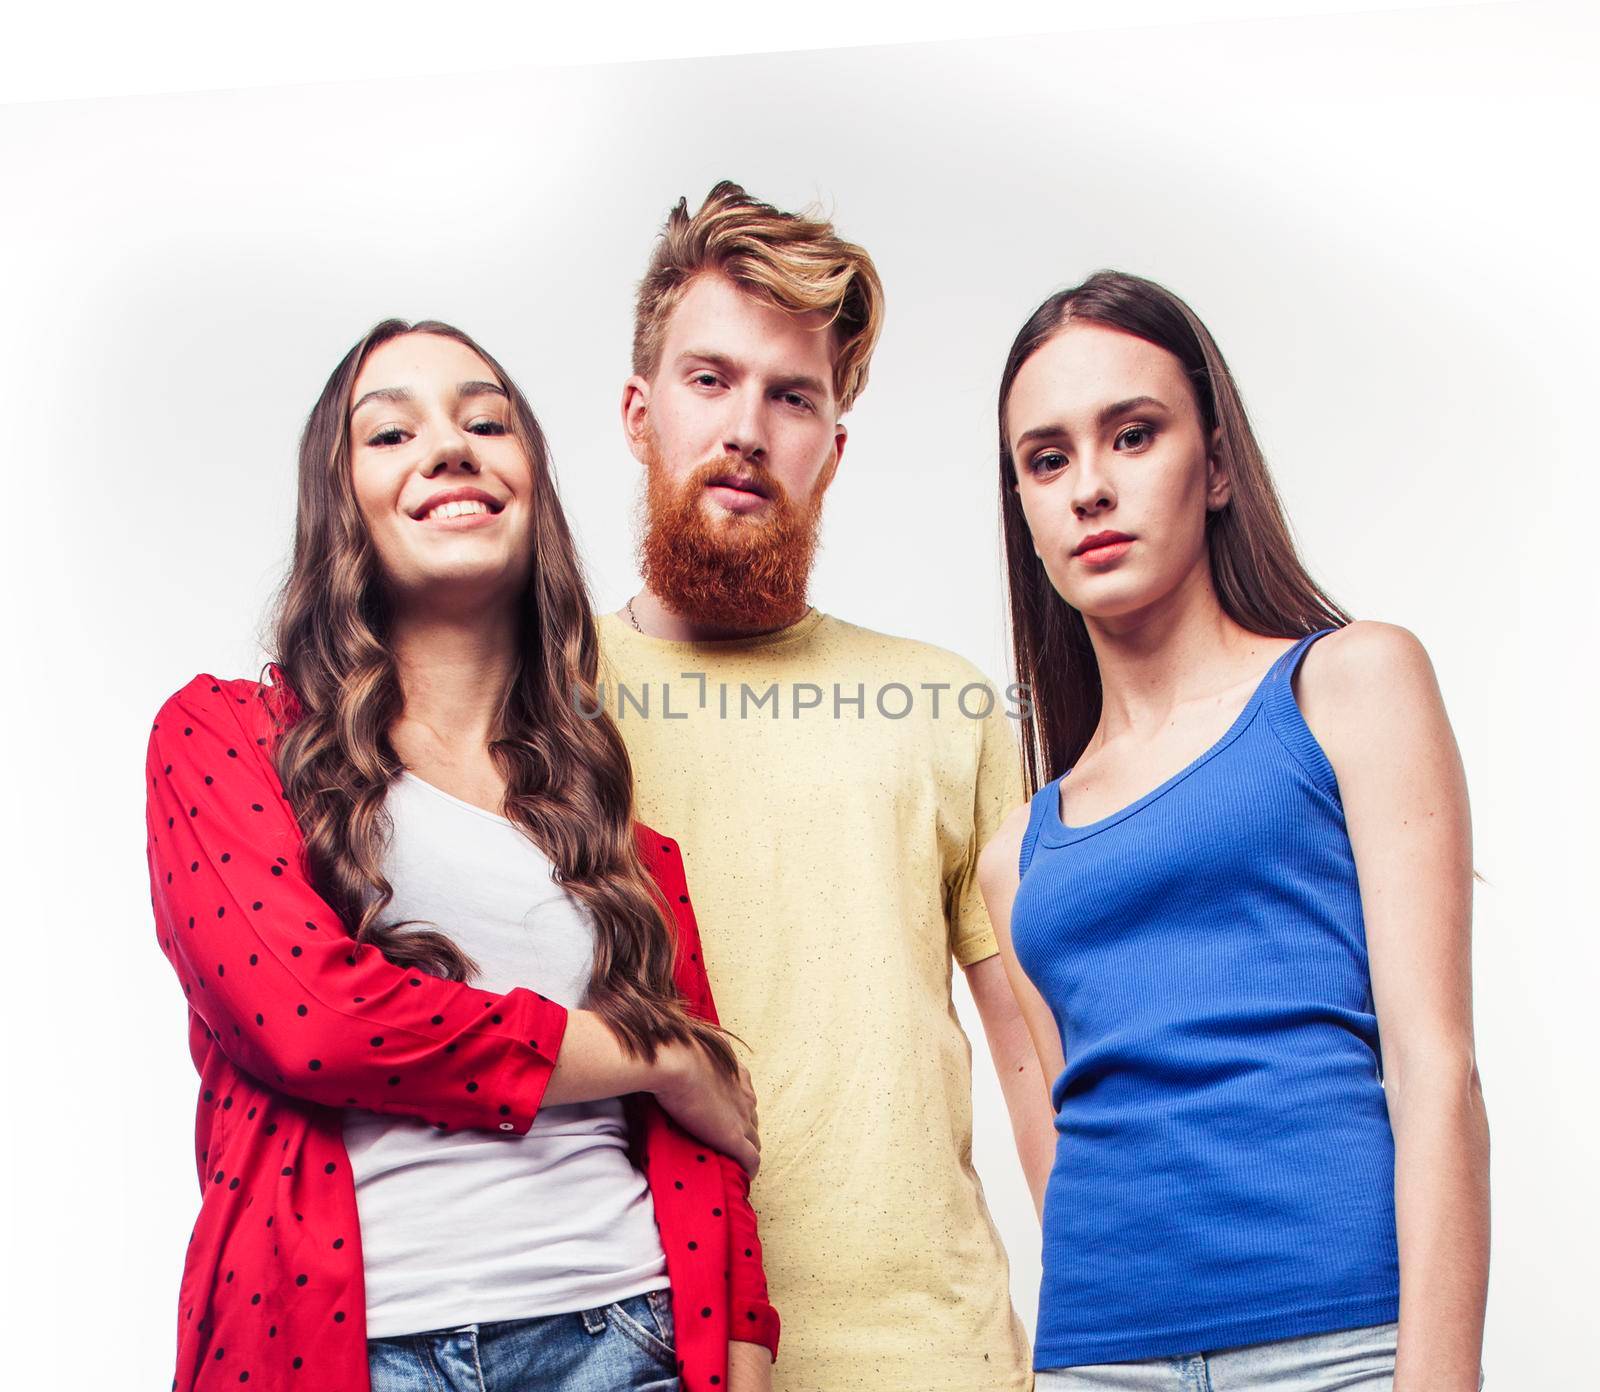 company of hipster guys, bearded red hair boy and girls students having fun together friends, diverse fashion style, lifestyle people concept isolated on white background close up